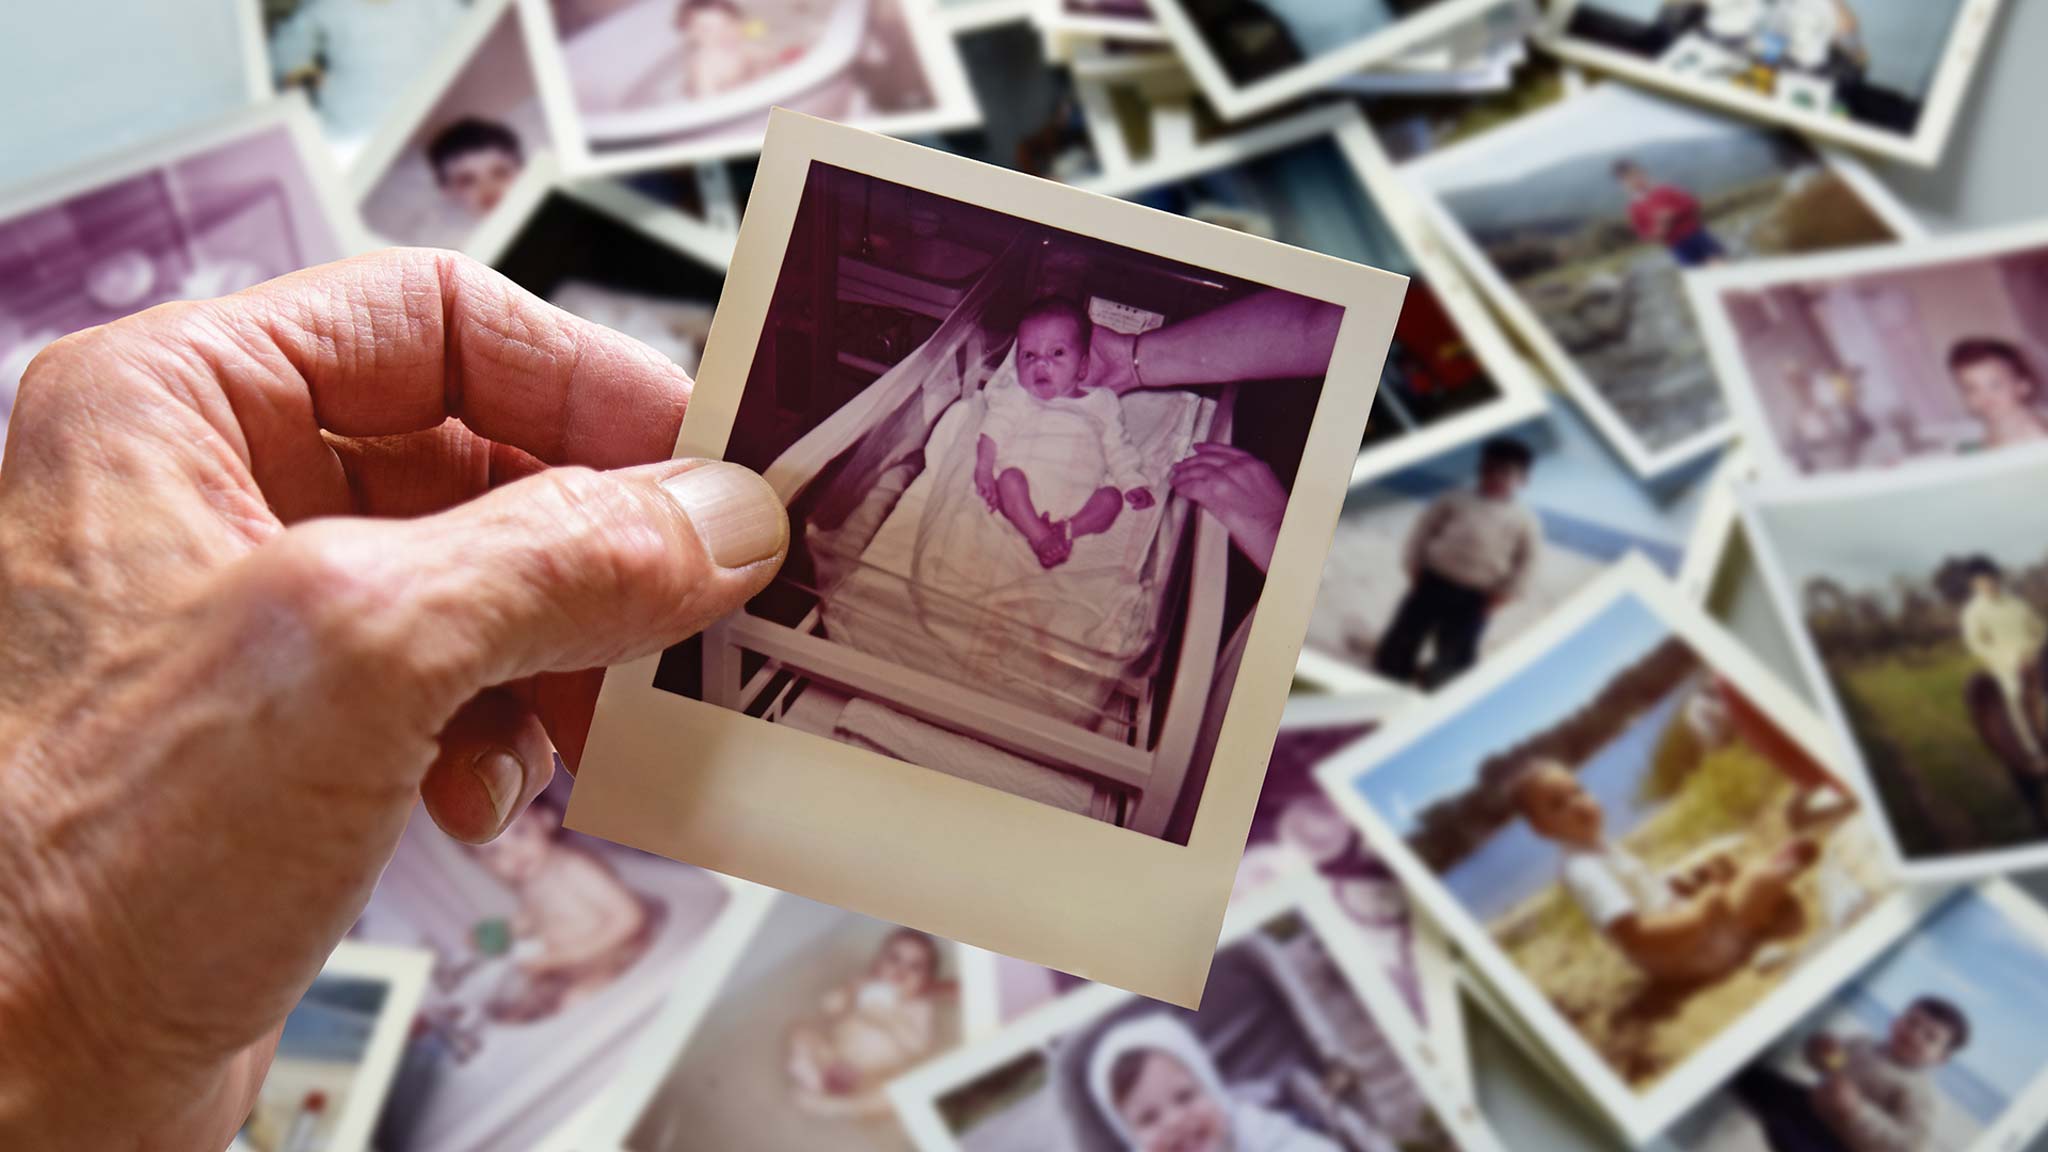 An image of an elderly hand holding a photograph of a baby in a hospital bassinet. Behind the hand, a collection of family photos is strewn across a countertop.